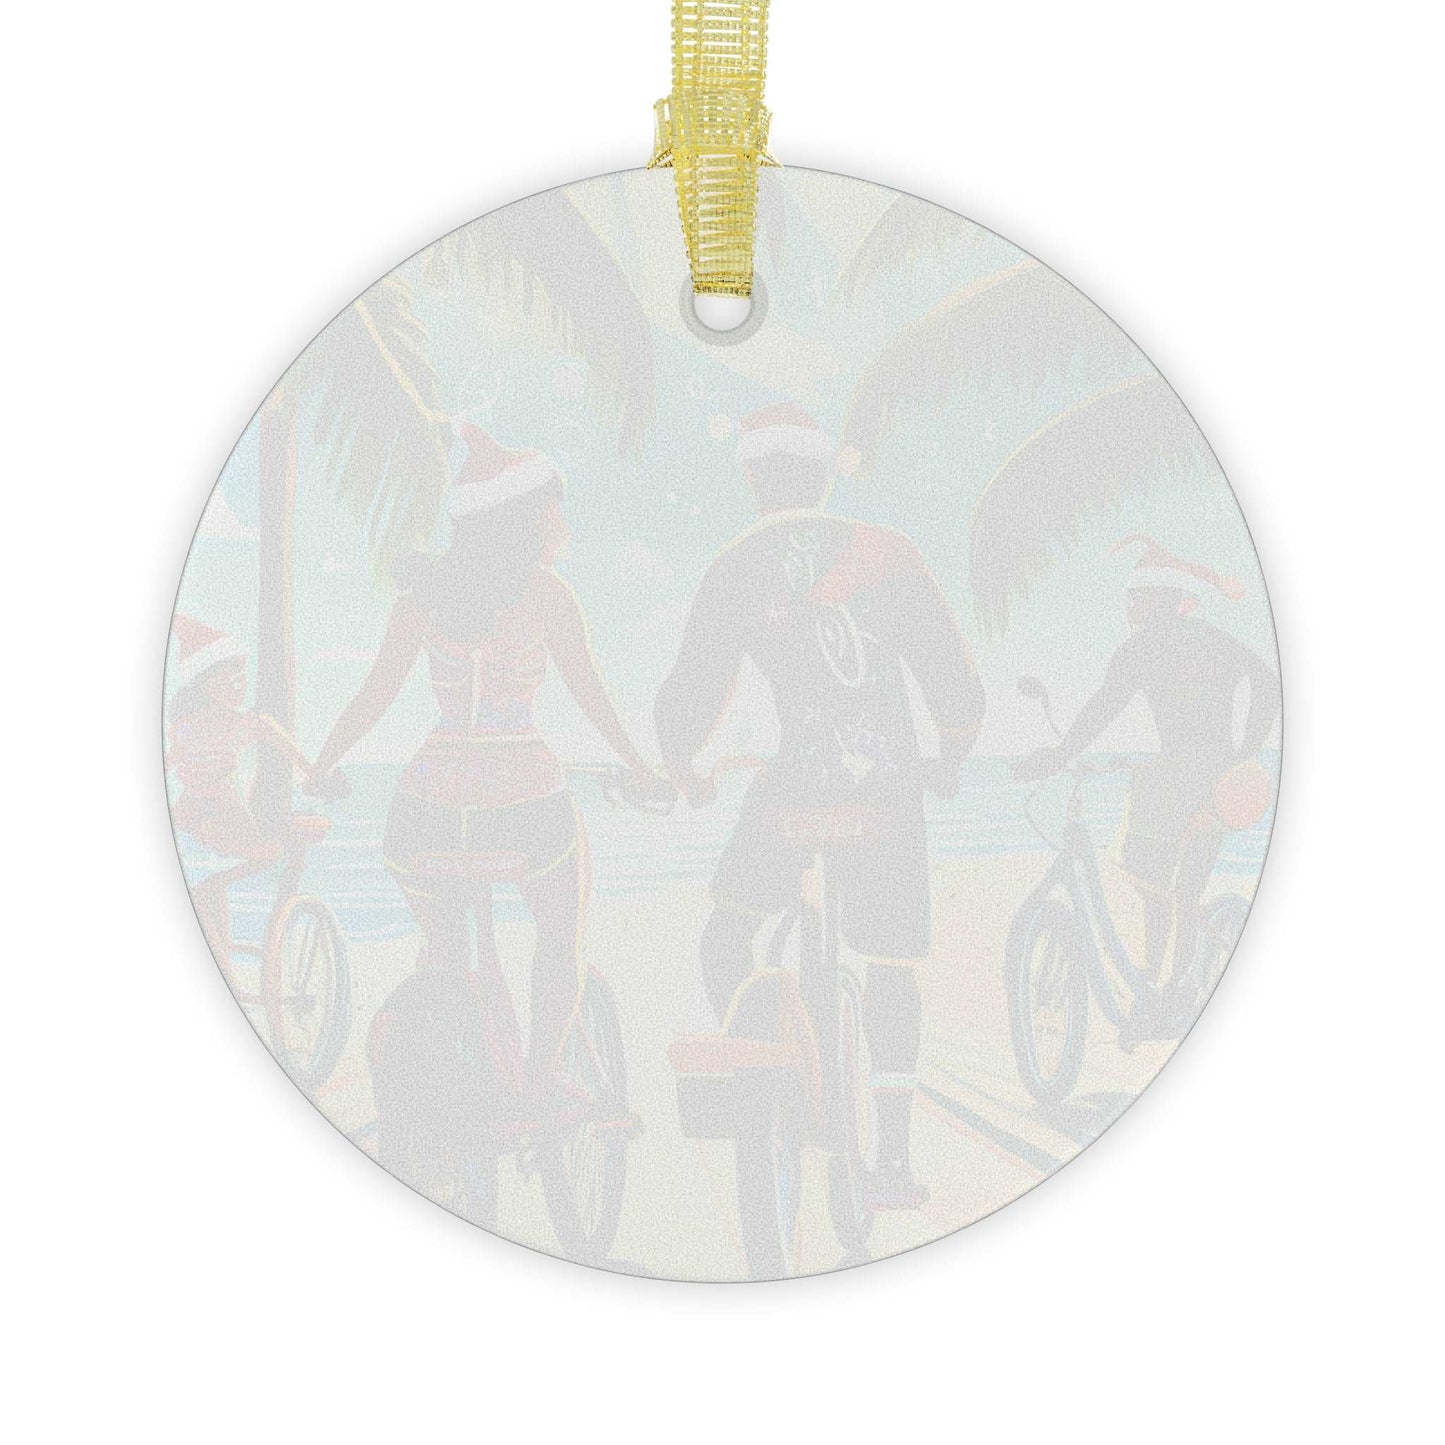 Ebiking together at the beach for Christmas Glass Ornaments